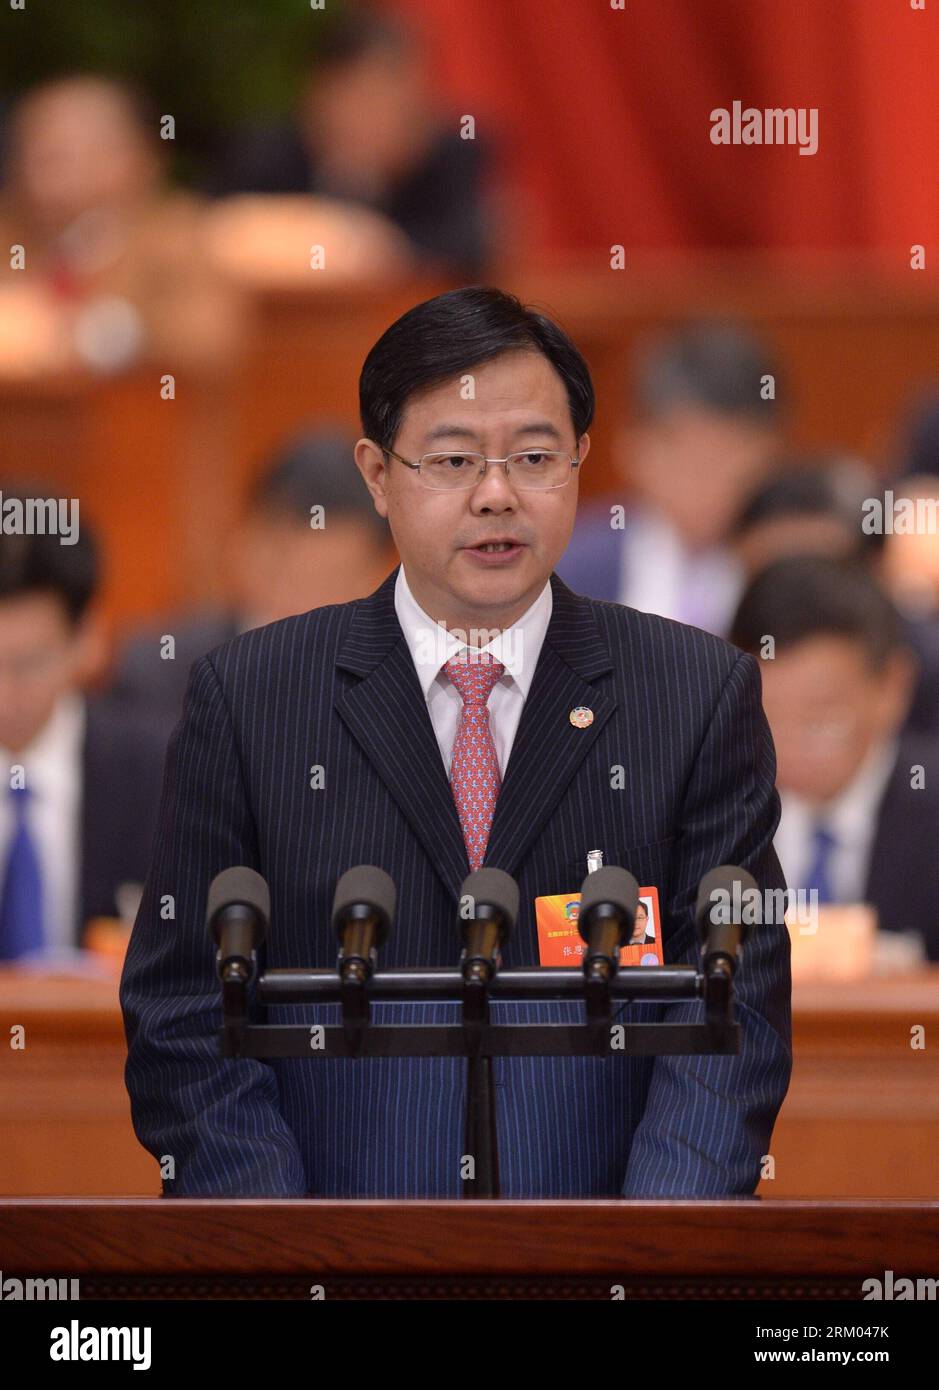 Bildnummer: 59318241  Datum: 08.03.2013  Copyright: imago/Xinhua (130308) -- BEIJING, March 8, 2013 (Xinhua) -- Zhang Endi, a member of the 12th National Committee of the Chinese People s Political Consultative Conference (CPPCC), speaks at the third plenary meeting of the first session of the 12th CPPCC National Committee at the Great Hall of the in Beijing, capital of China, March 8, 2013. (Xinhua/Wang Ye) (hdt) (TWO SESSIONS)CHINA-BEIJING-CPPCC-THIRD PLENARY MEETING (CN) PUBLICATIONxNOTxINxCHN People Politik Politische Konsultativkonferenz Versammlung x0x xrj 2013 hoch      59318241 Date 08 Stock Photo